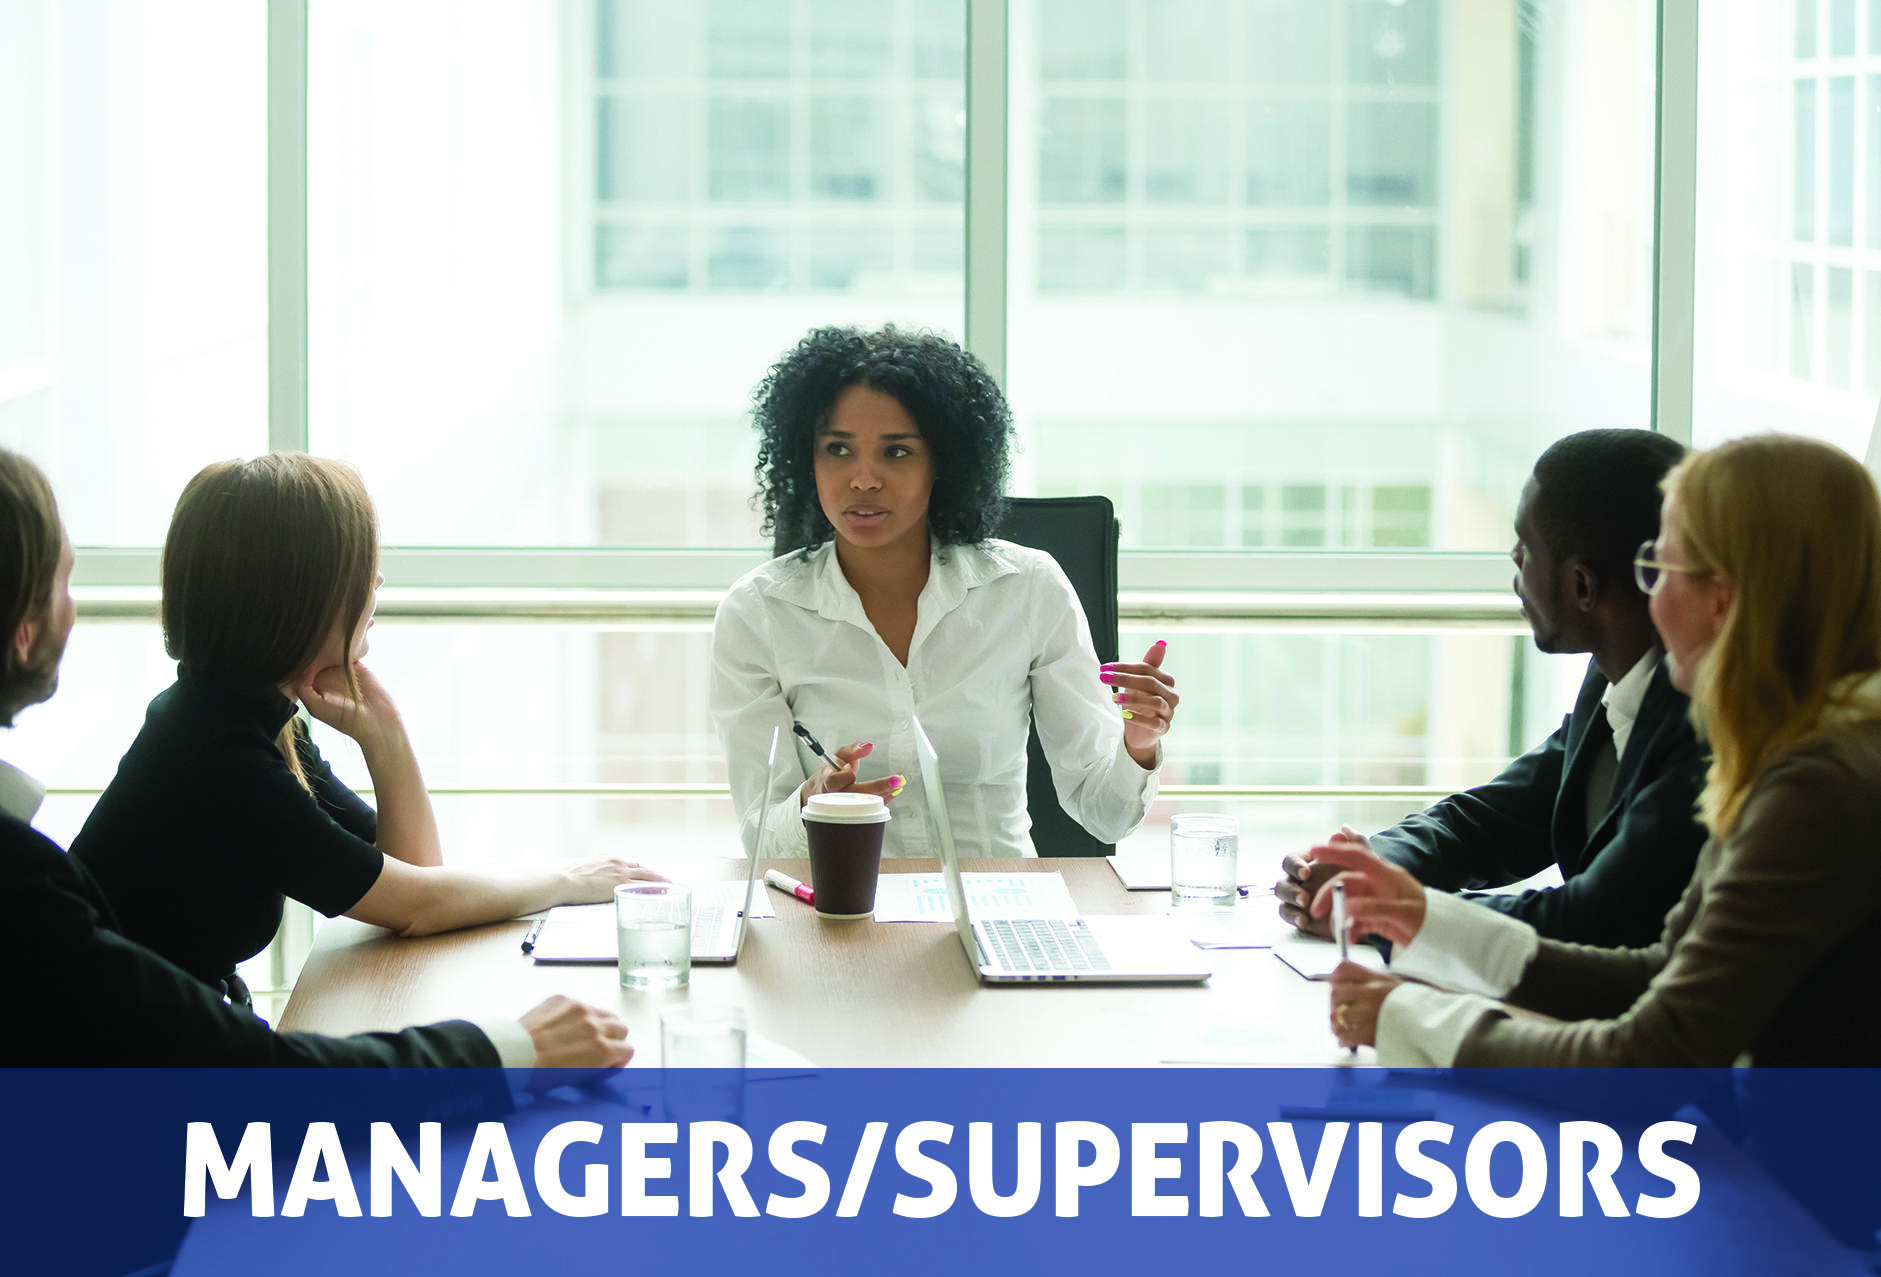 Managers/Supervisors